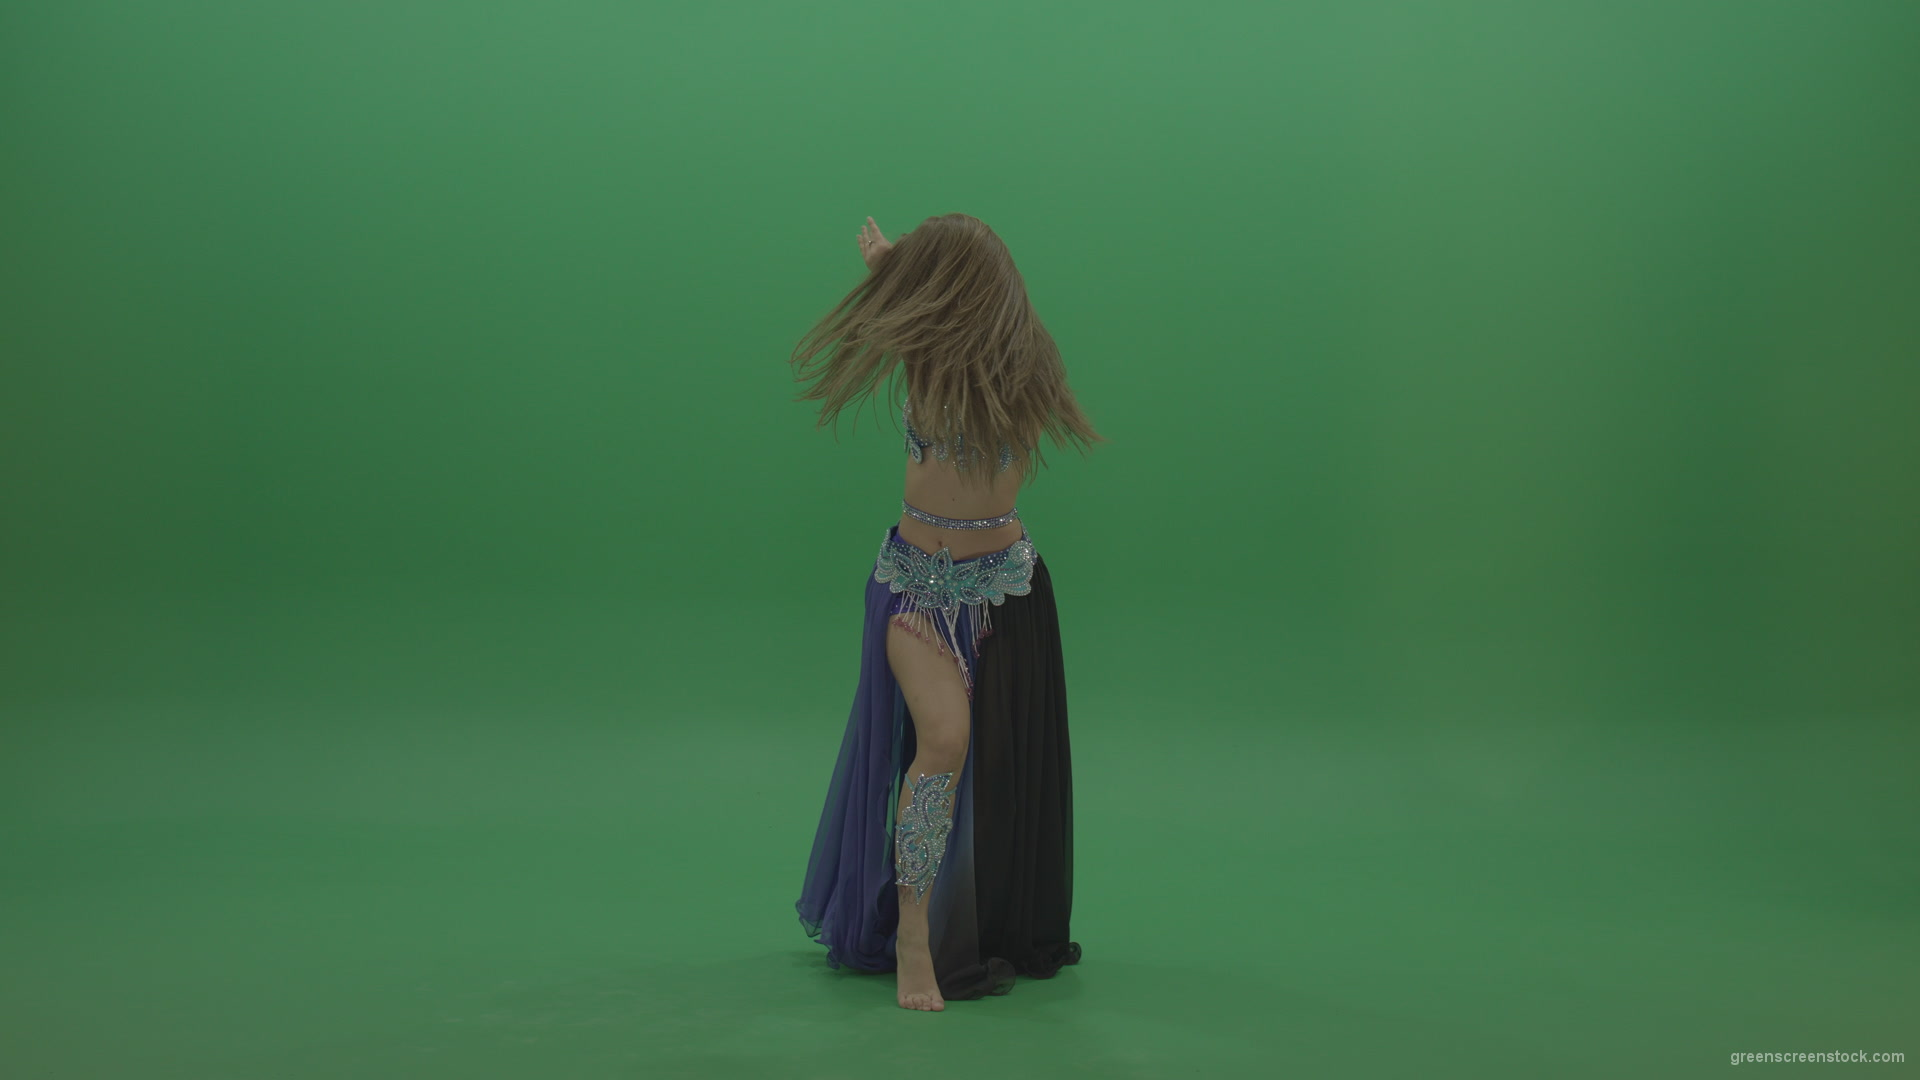 Foxy-belly-dancer-in-purple-and-black-wear-display-amazing-dance-moves-over-chromakey-background_009 Green Screen Stock